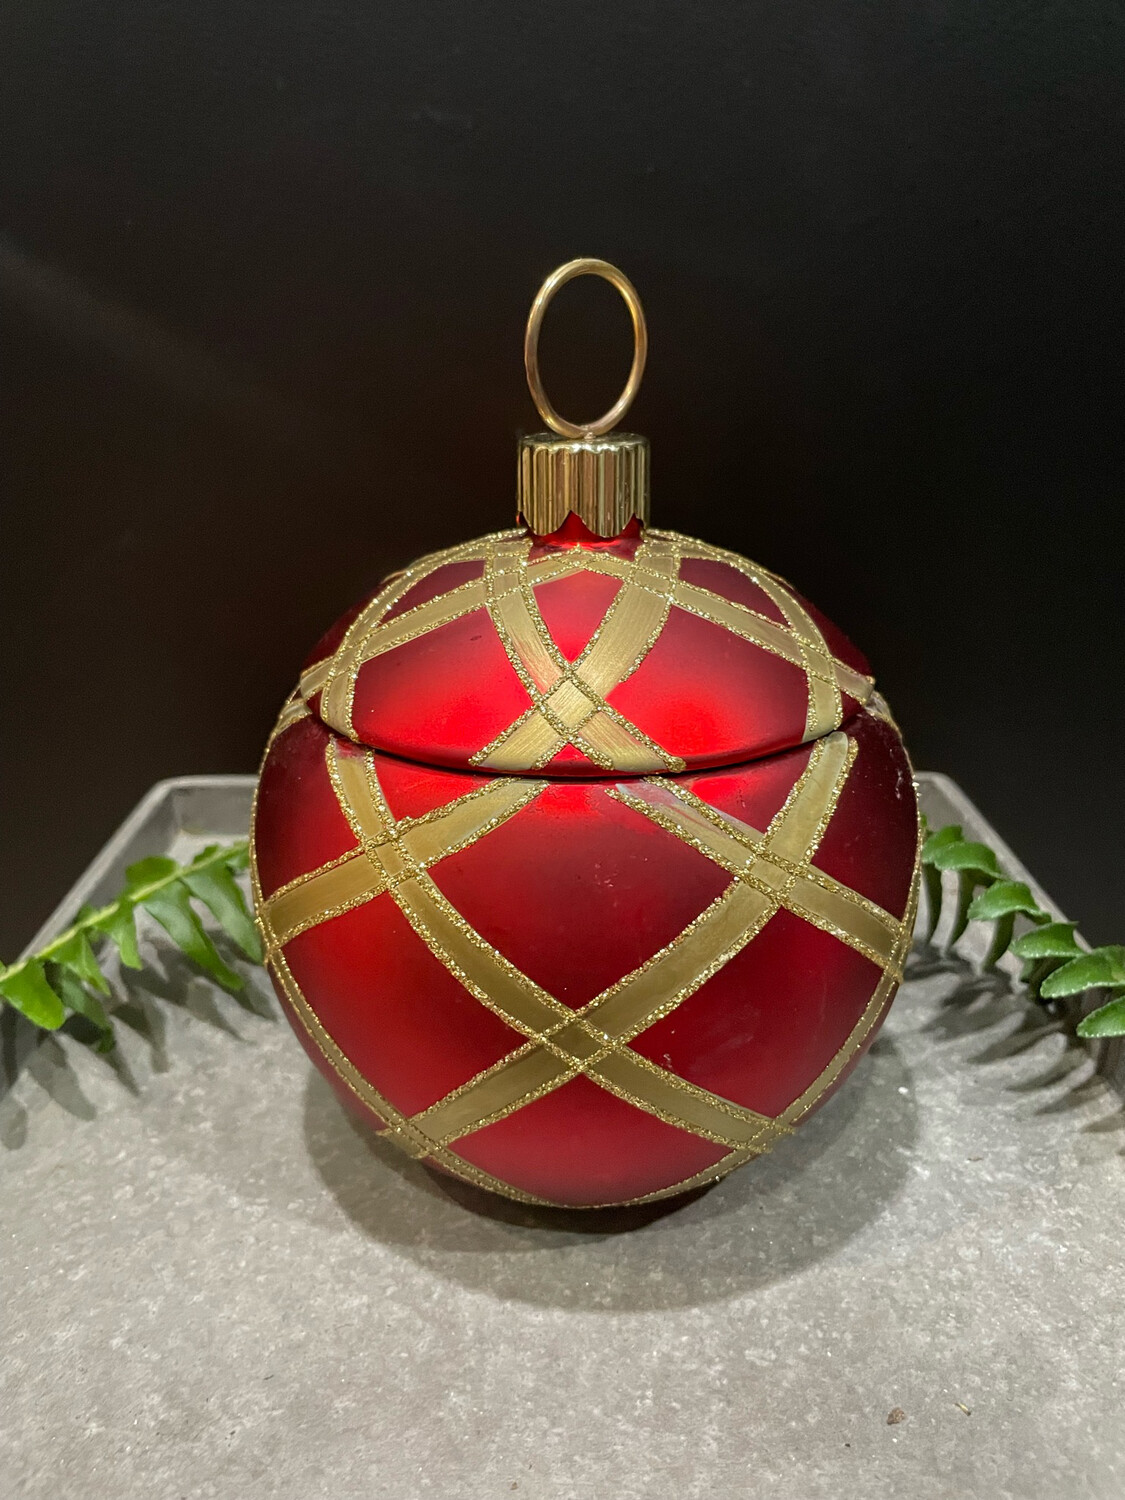 RED AND GOLD ORNAMENT